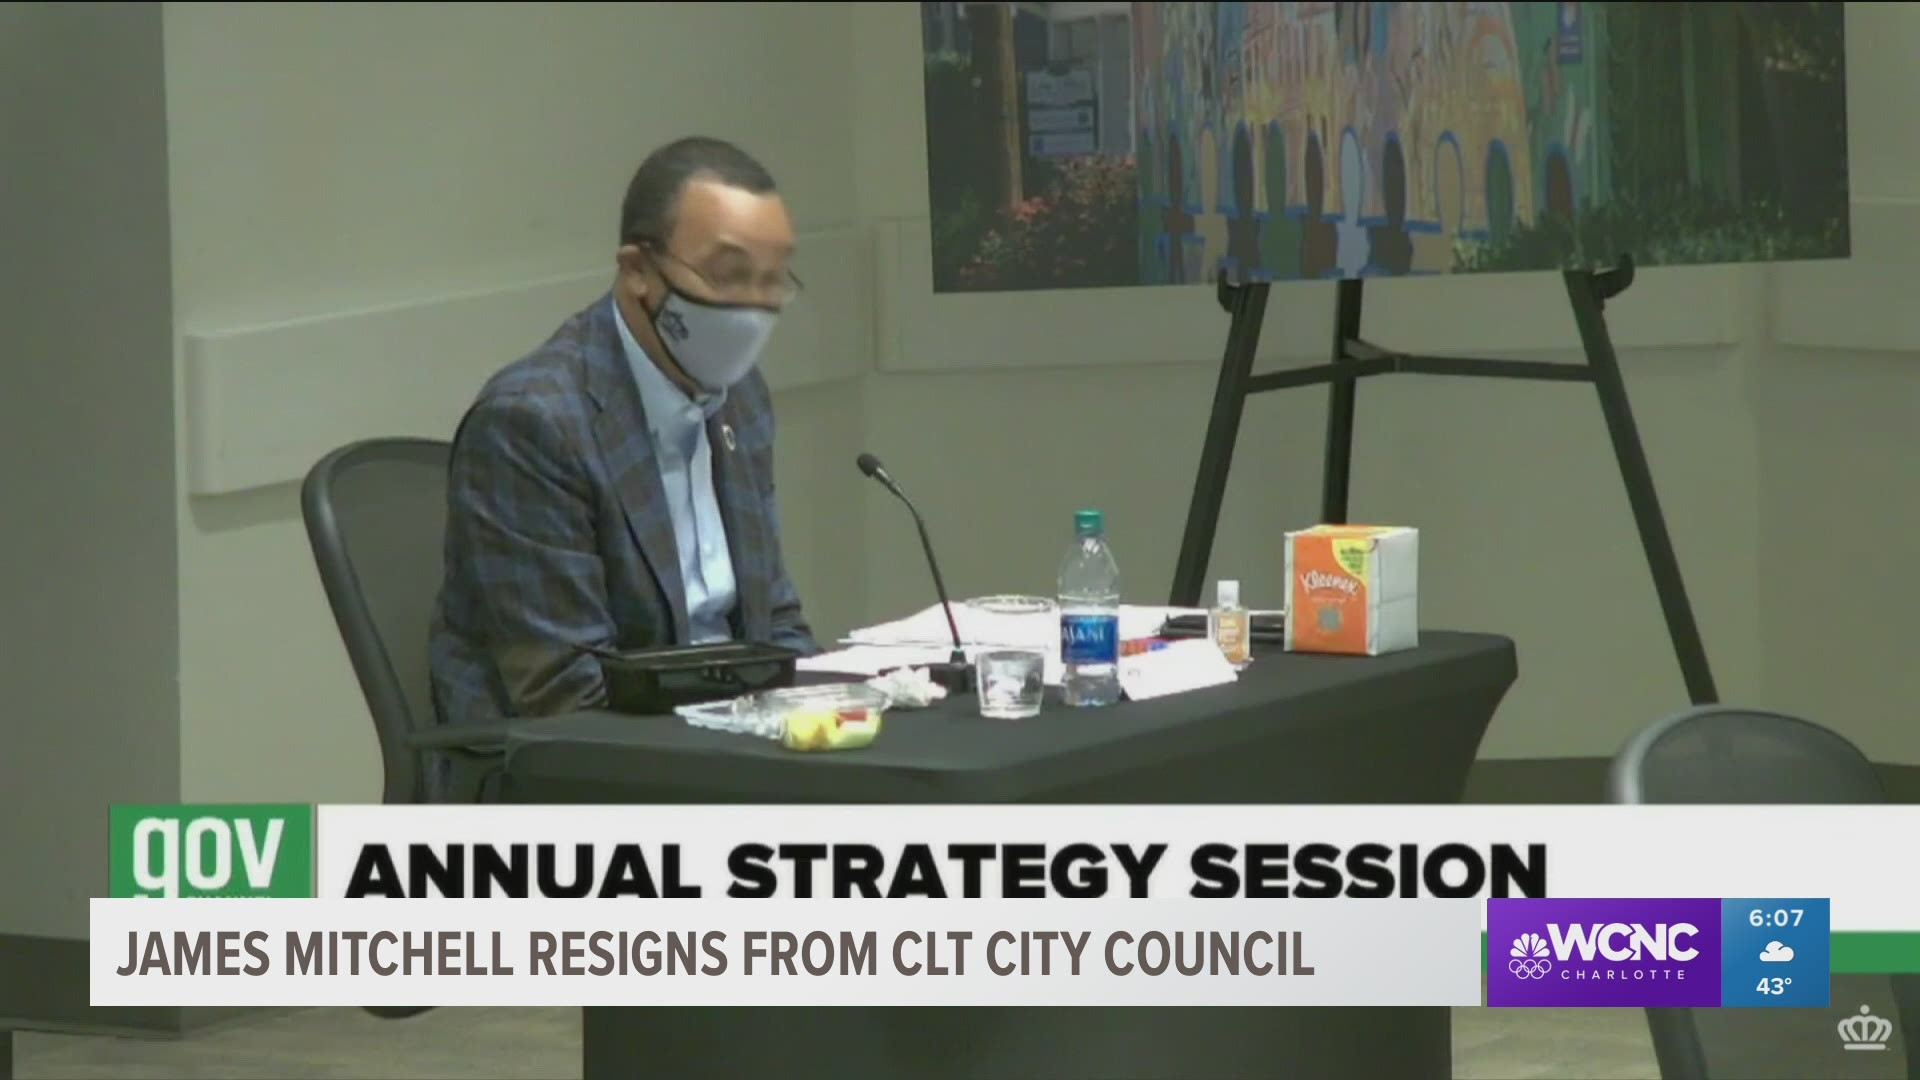 The annual strategy meeting for Charlotte city leaders began Monday with the news that councilman James 'Smuggie' Mitchell is resigning.